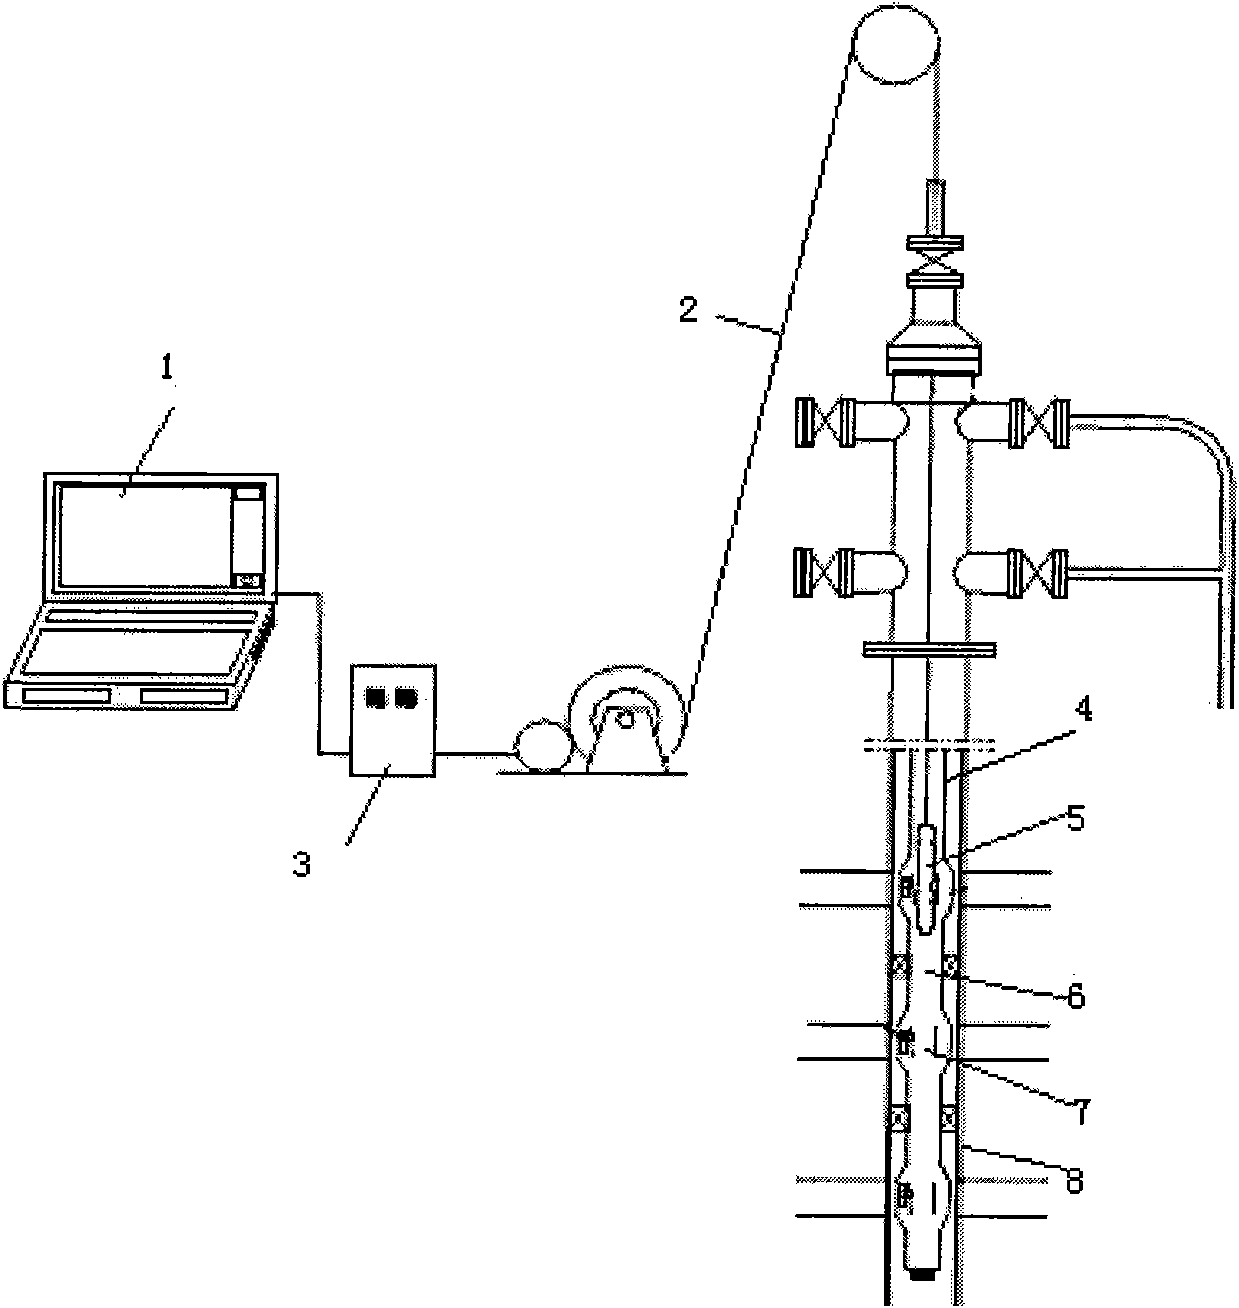 Intelligent injection allocation process of water injection well